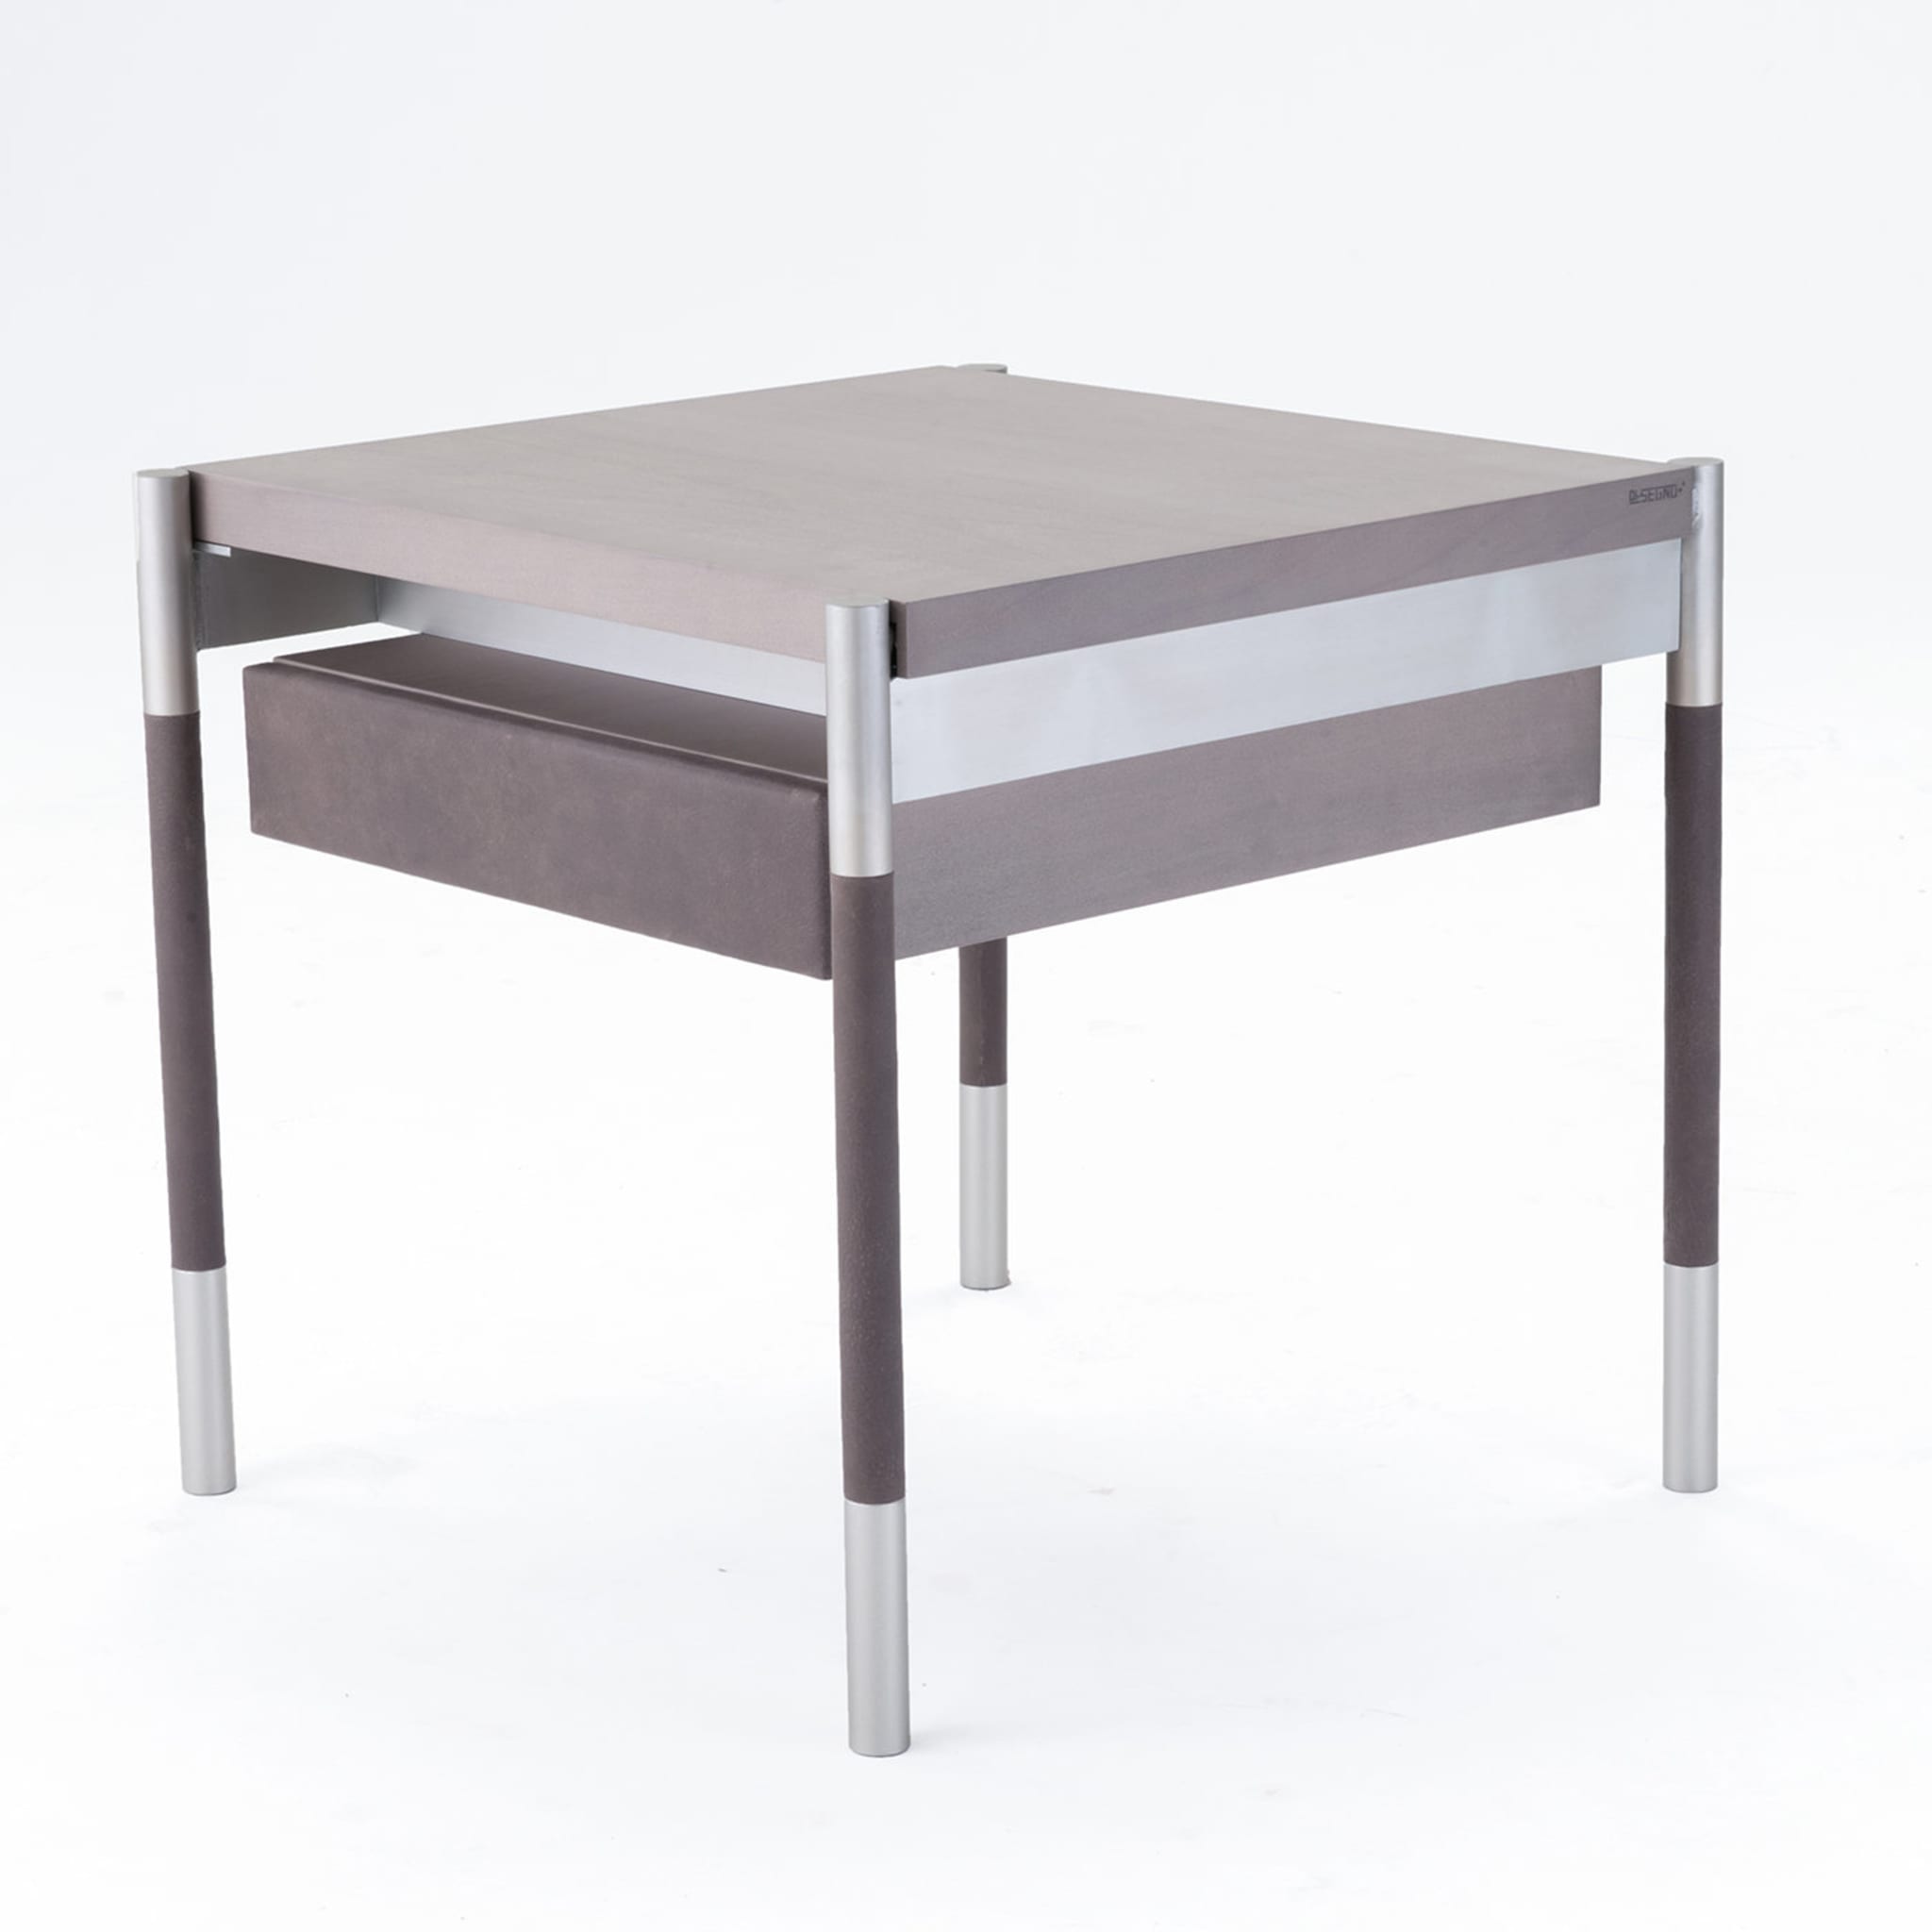 Soffio Maple-Wood Table by Michael Schoeller - Alternative view 1